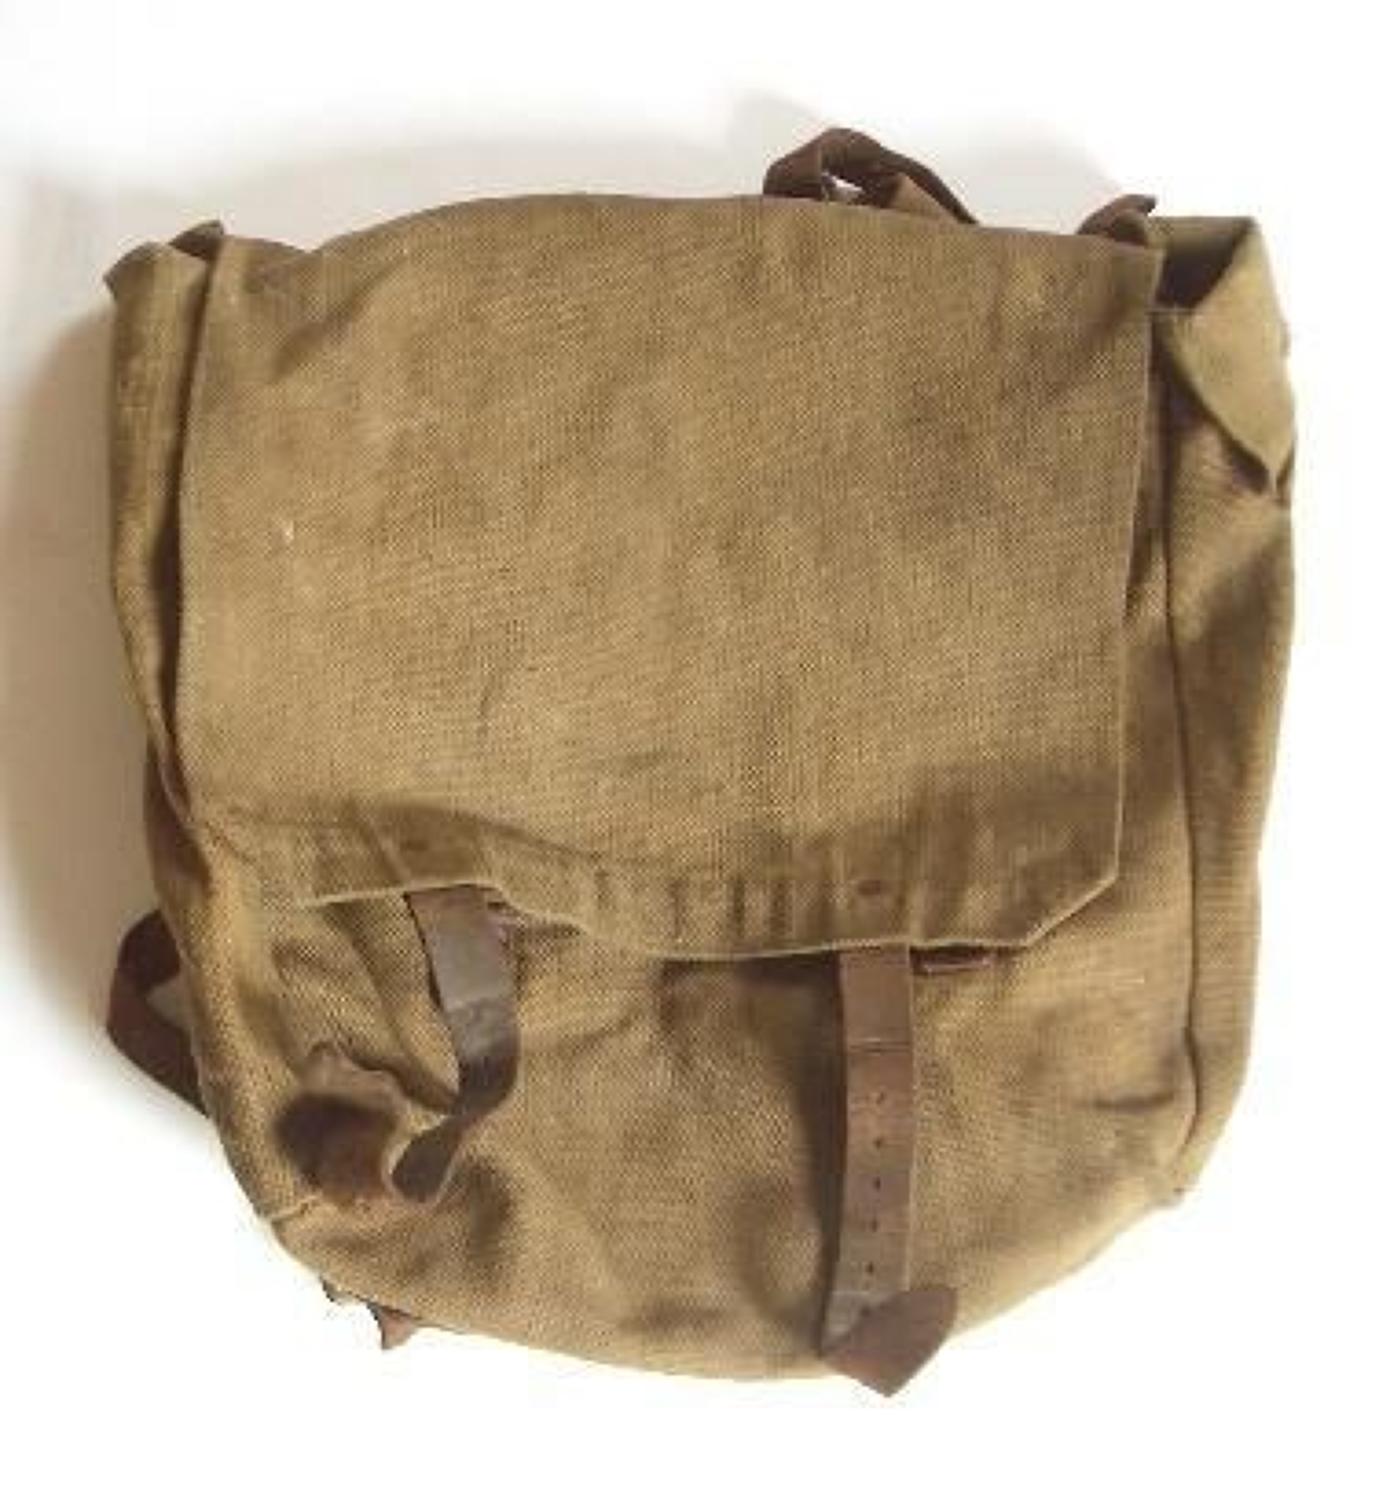 WW1 1914 British Infantry Equipment Large Pack with Field conversion.